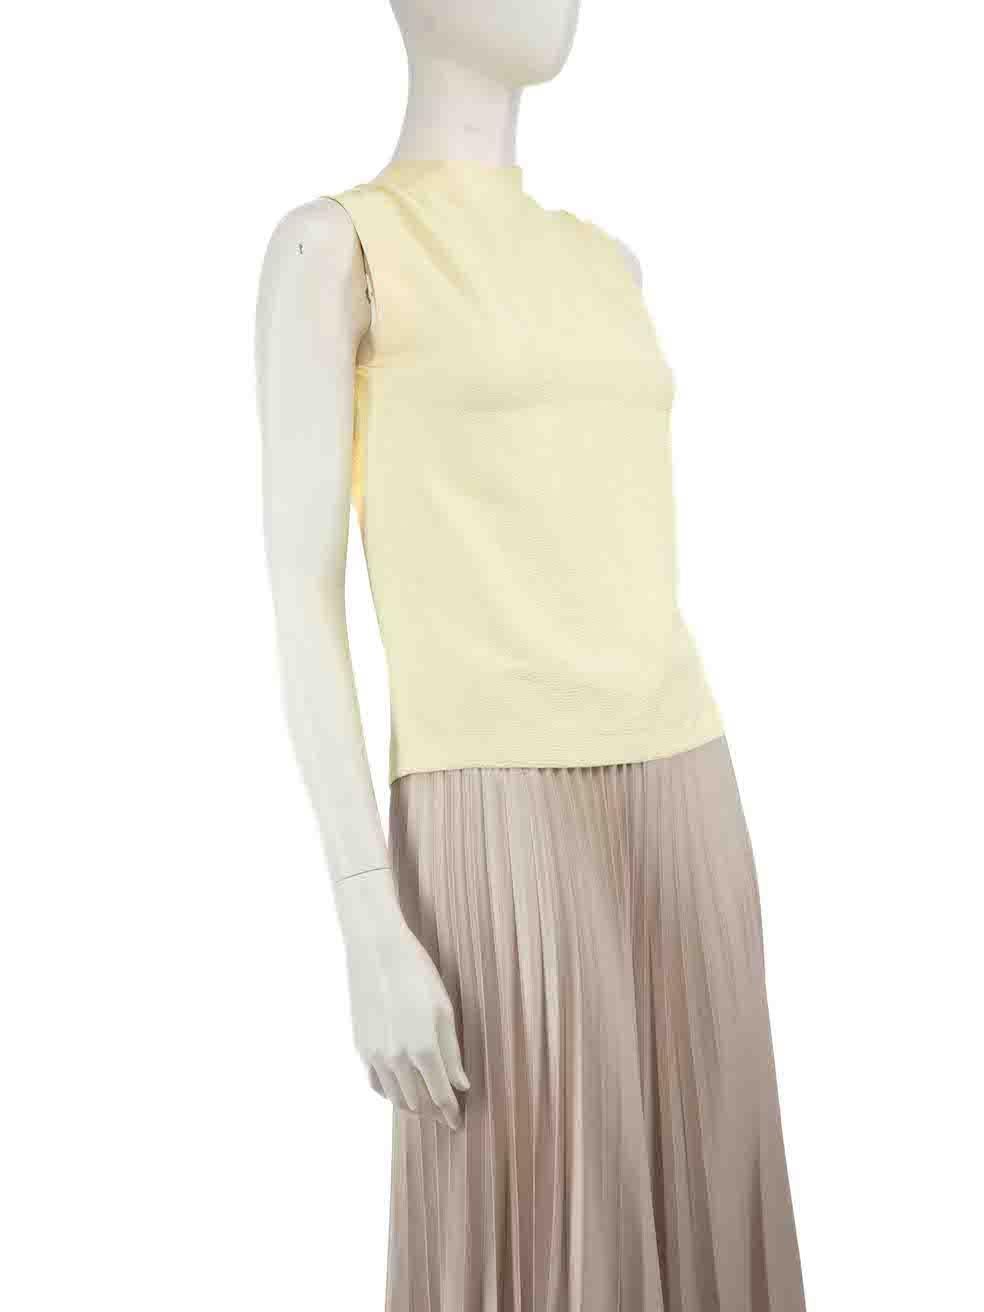 CONDITION is Never worn. No visible wear to top is evident on this new Sandro designer resale item.
 
 Details
 Yellow
 Viscose
 Top
 Sleeveless
 V-neck
 Front zip fastening
 Mesh shoulder panel
 
 
 Made in Tunisia
 
 Composition
 99% Viscose, 1%